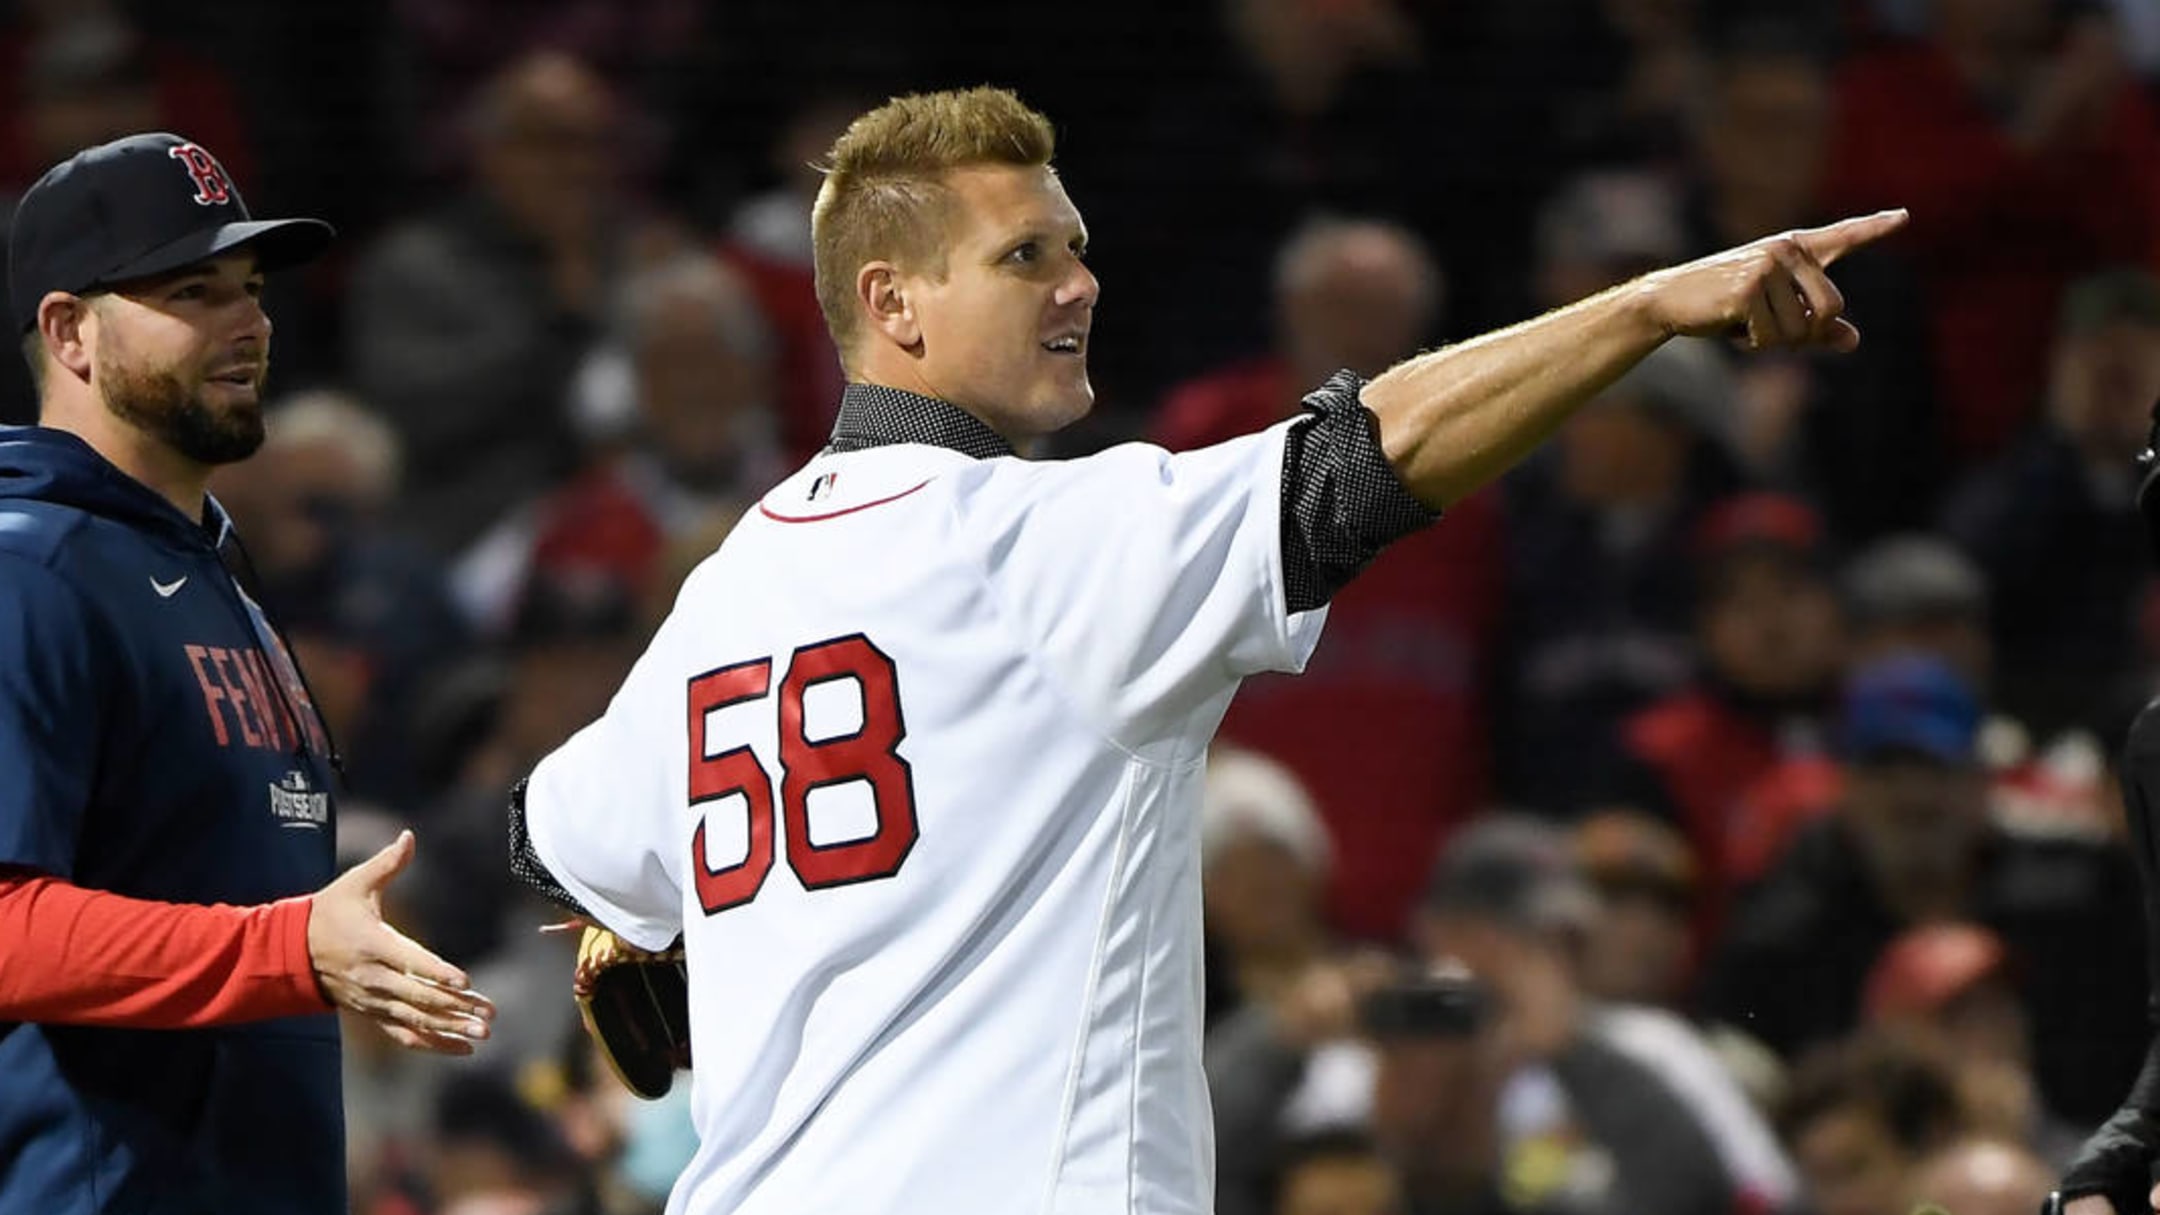 Watch: Jonathan Papelbon threw a real heater on ceremonial first